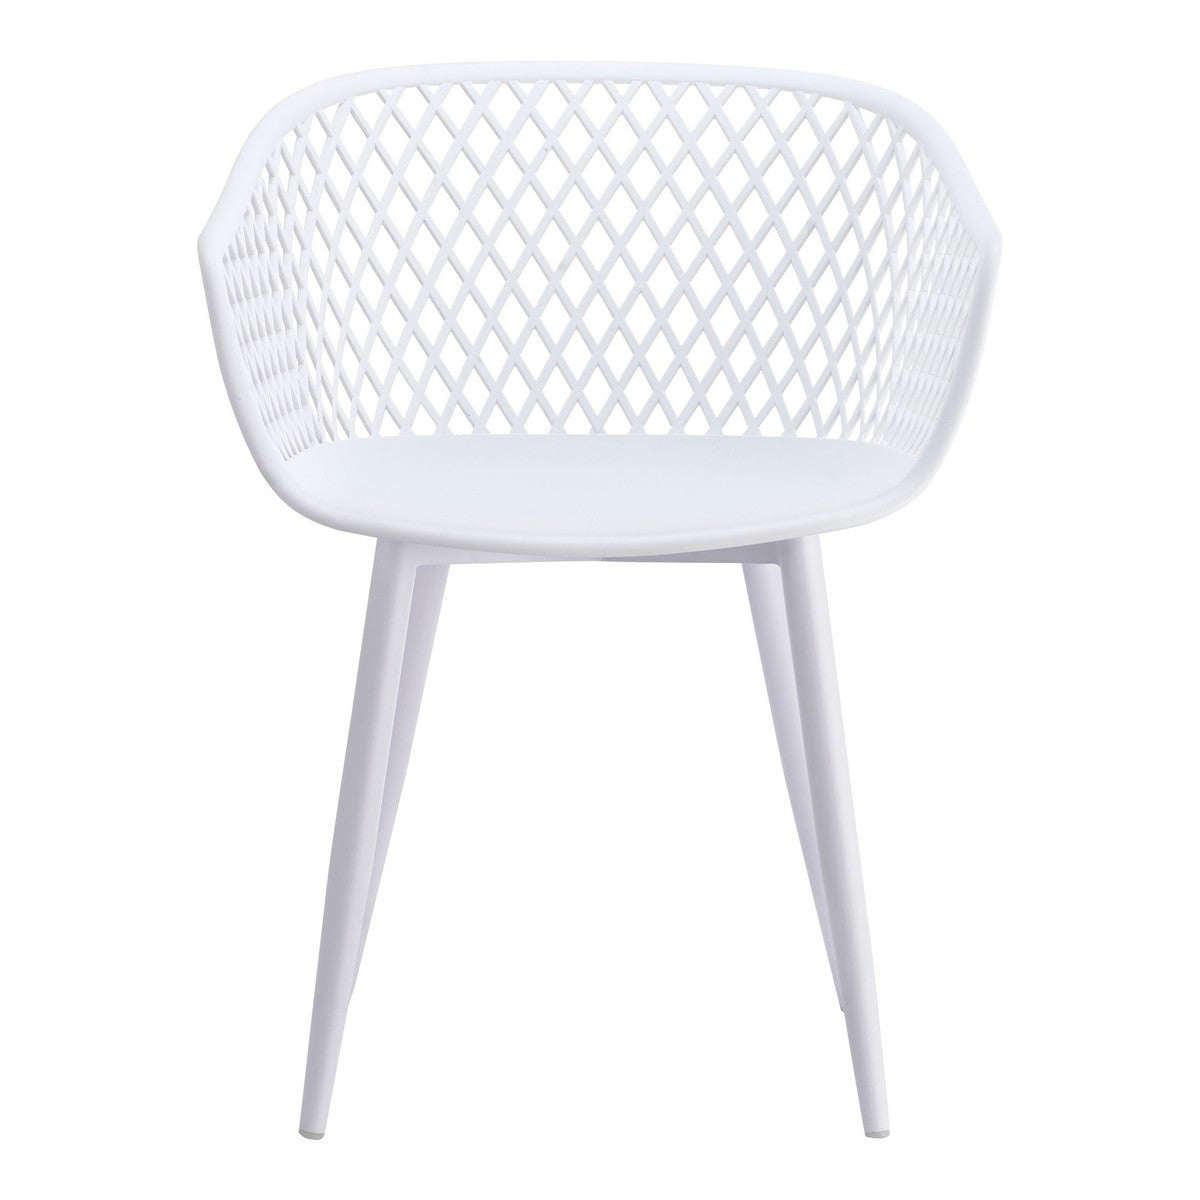 Moe's Home Collection Piazza Outdoor Chair White-Set of Two - QX-1001-18